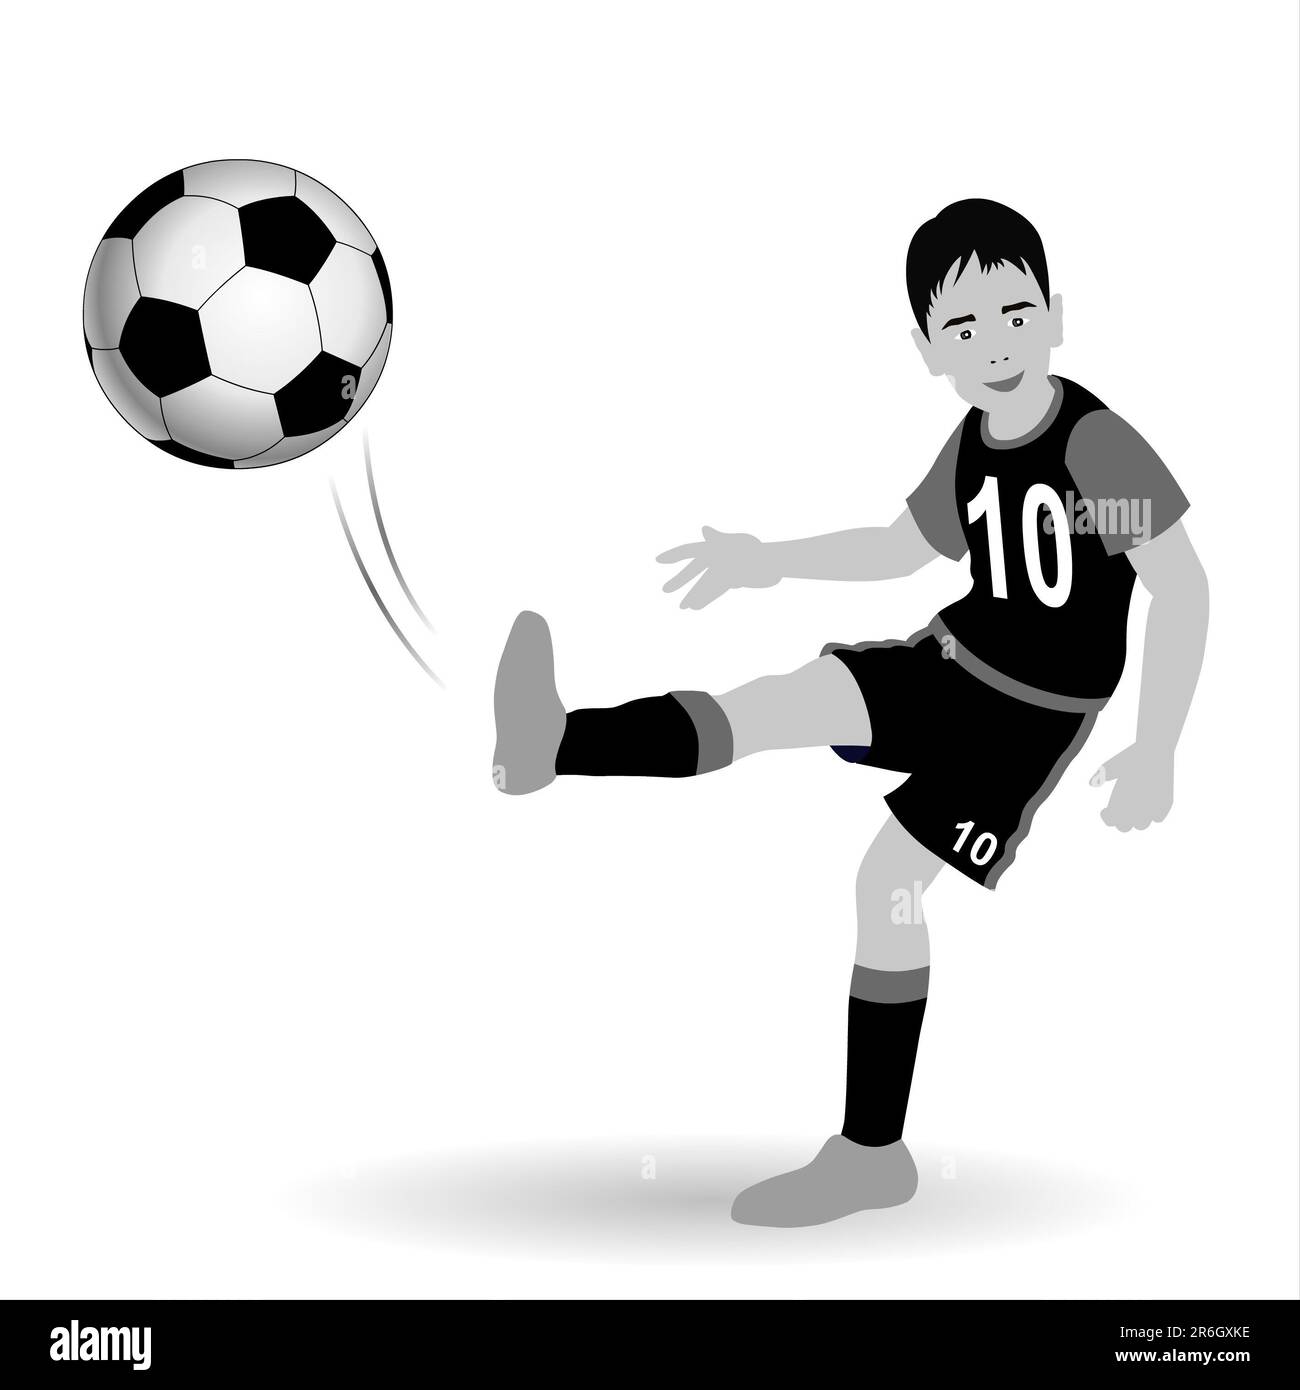 Soccer ball player kicking the ball on a white background Stock Photo